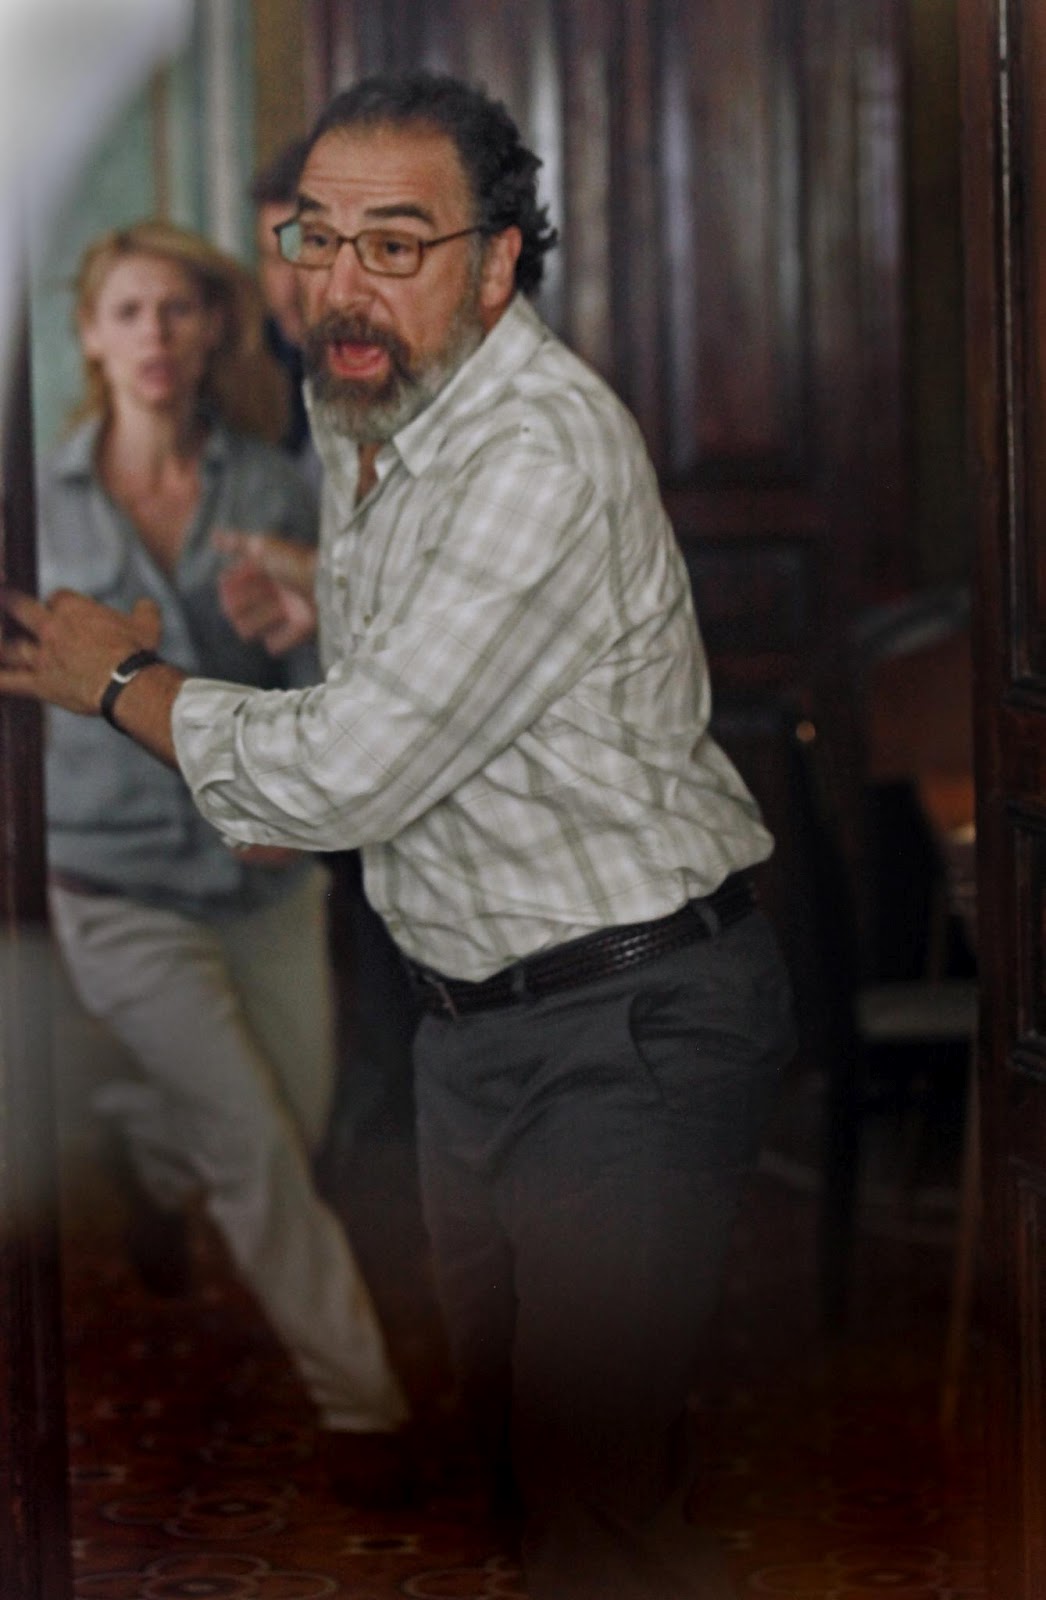 http://3.bp.blogspot.com/-6eZjAJPA954/UGNyiBYWH0I/AAAAAAAAa50/qCclXQA7Dt8/s1600/claire-danes-and-mandy-patinkin-in-homeland-large-picture.jpg